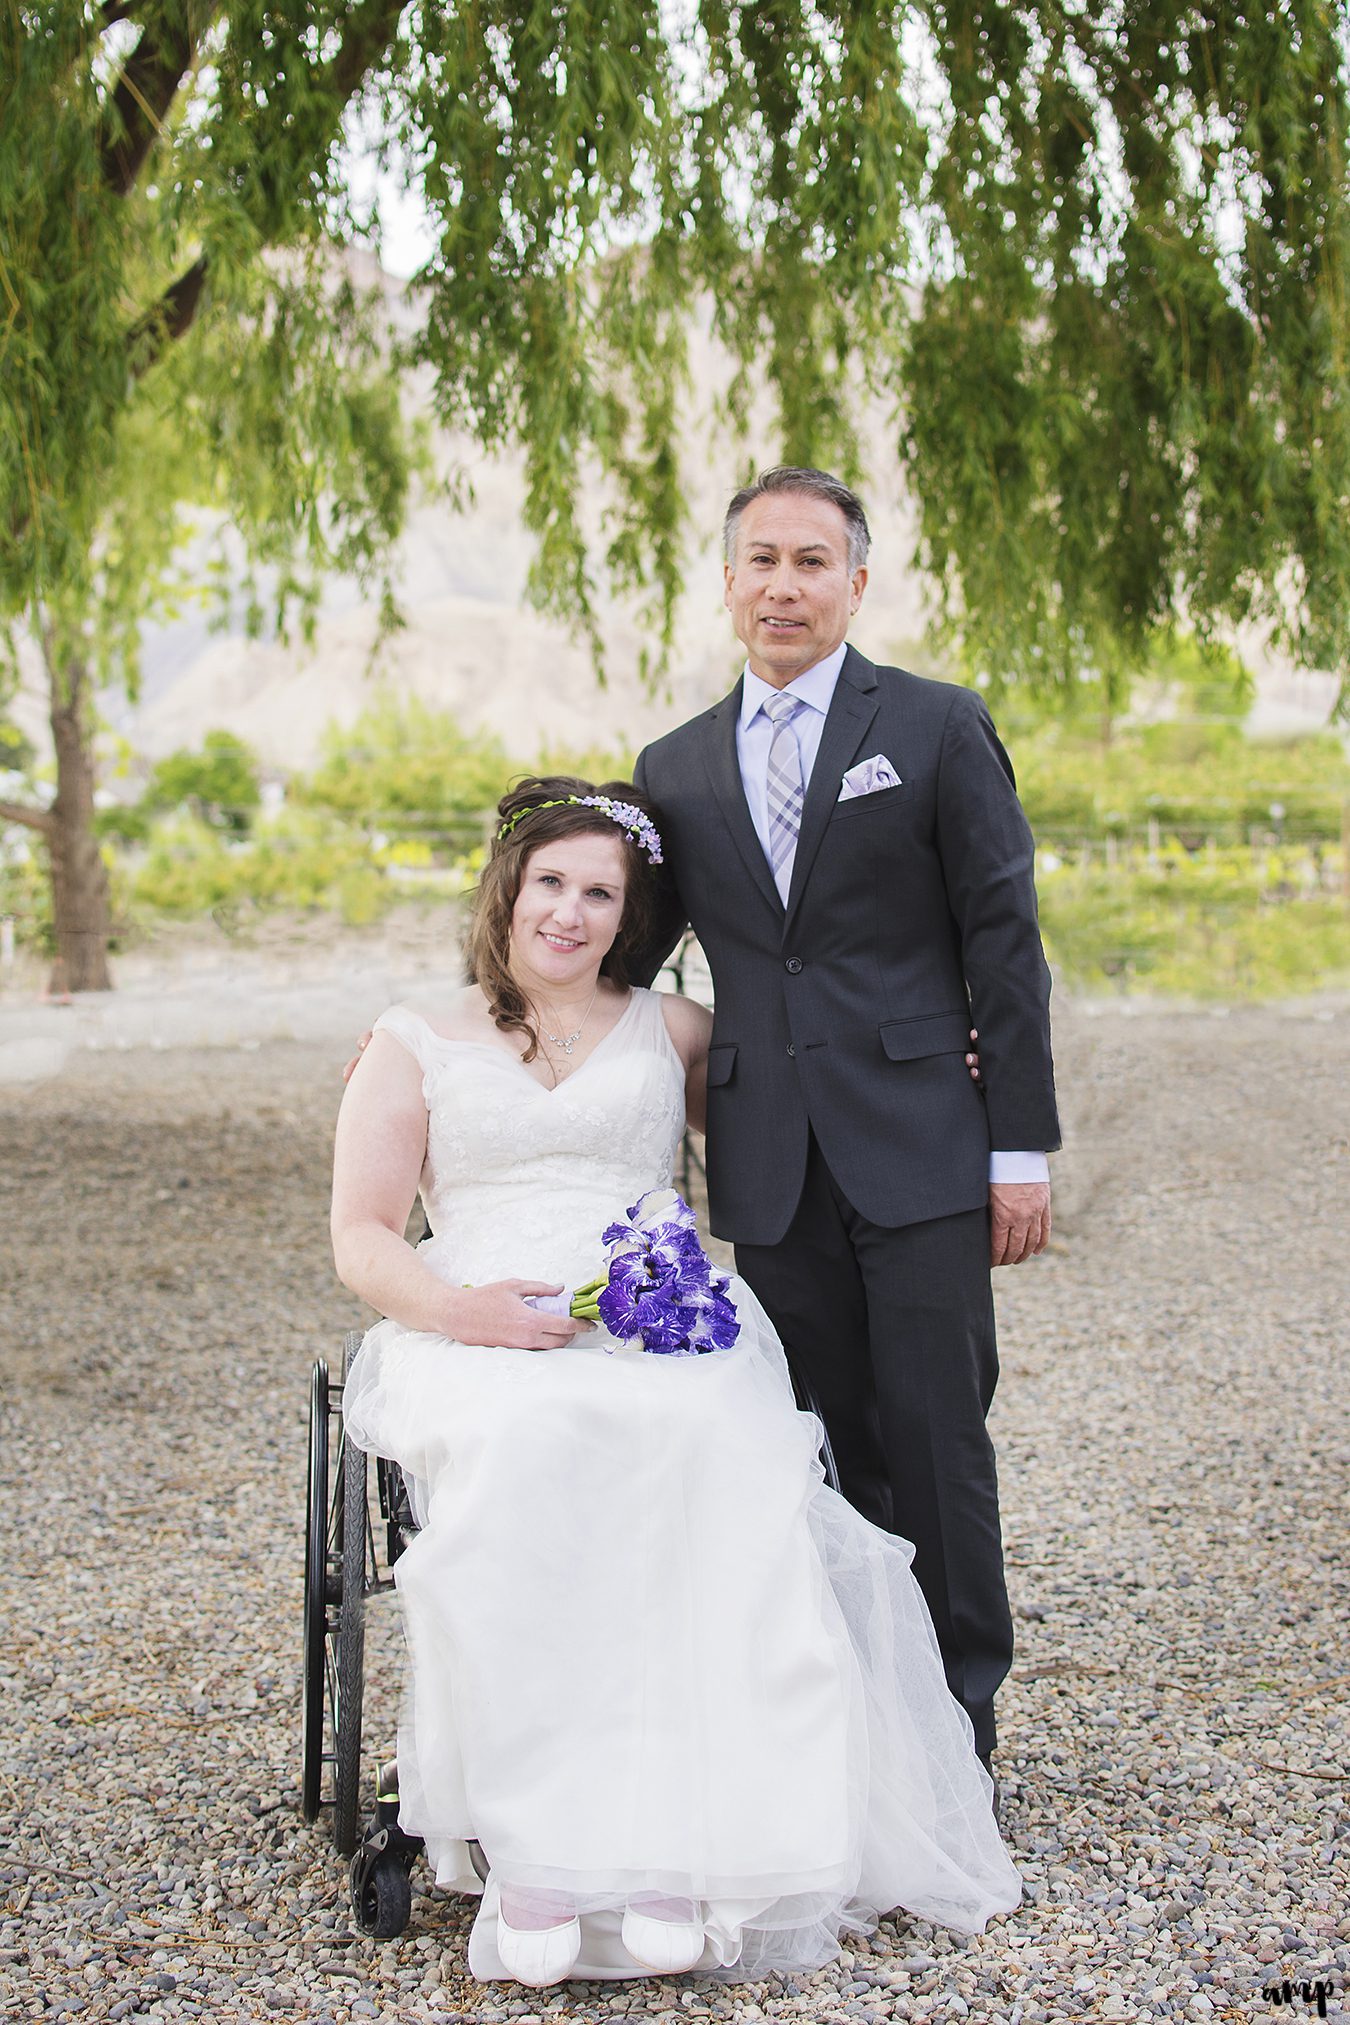 Bride in wheelchair and Groom standing, together beneath a willow tree